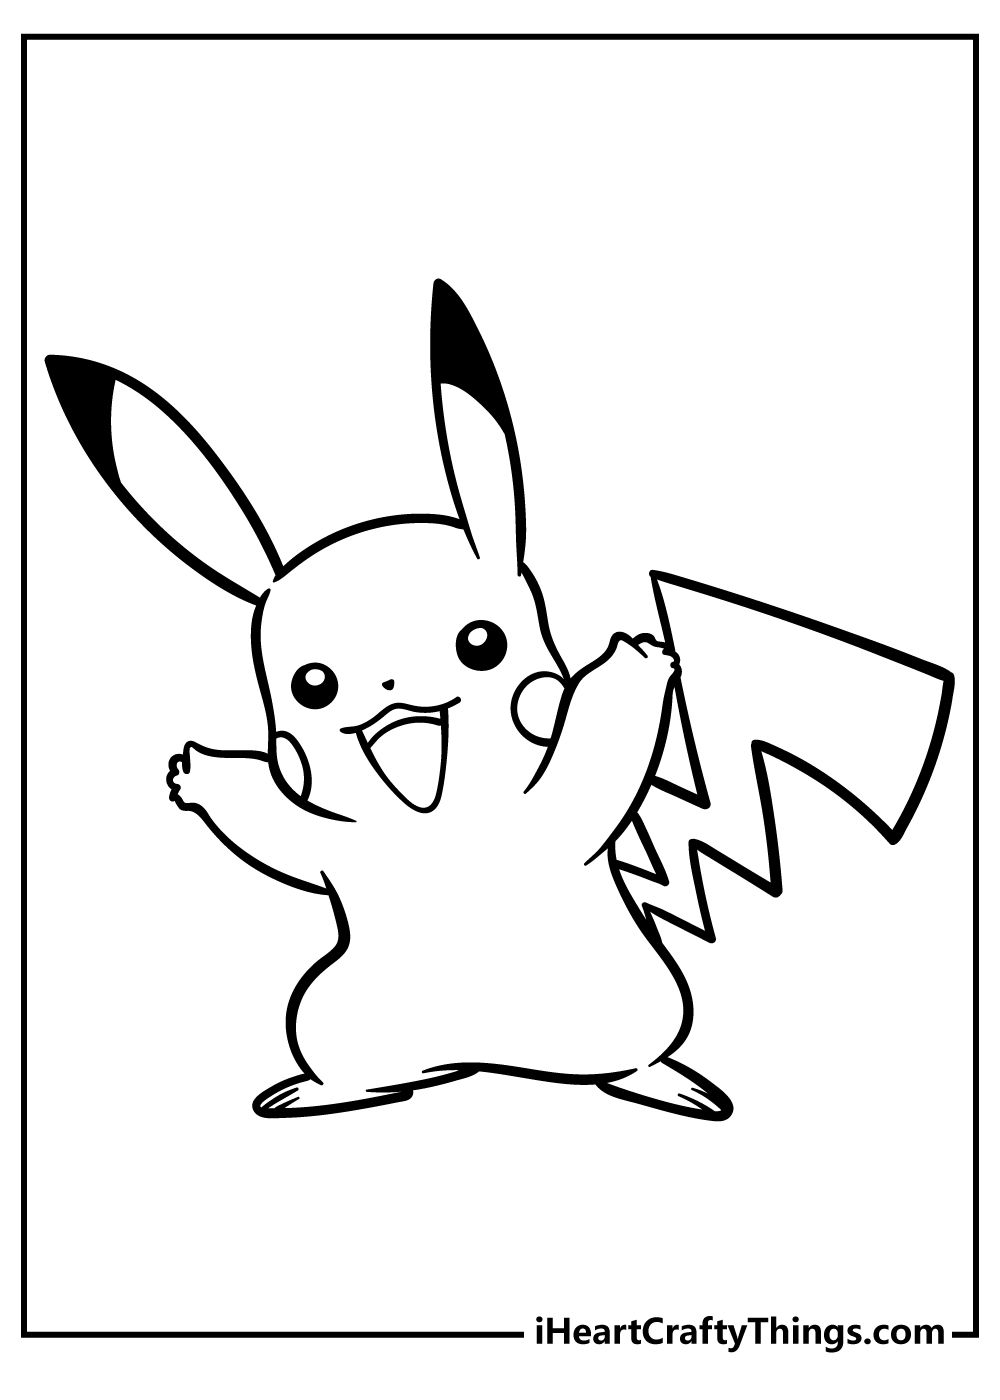 Pikachu Coloring Pages free printable